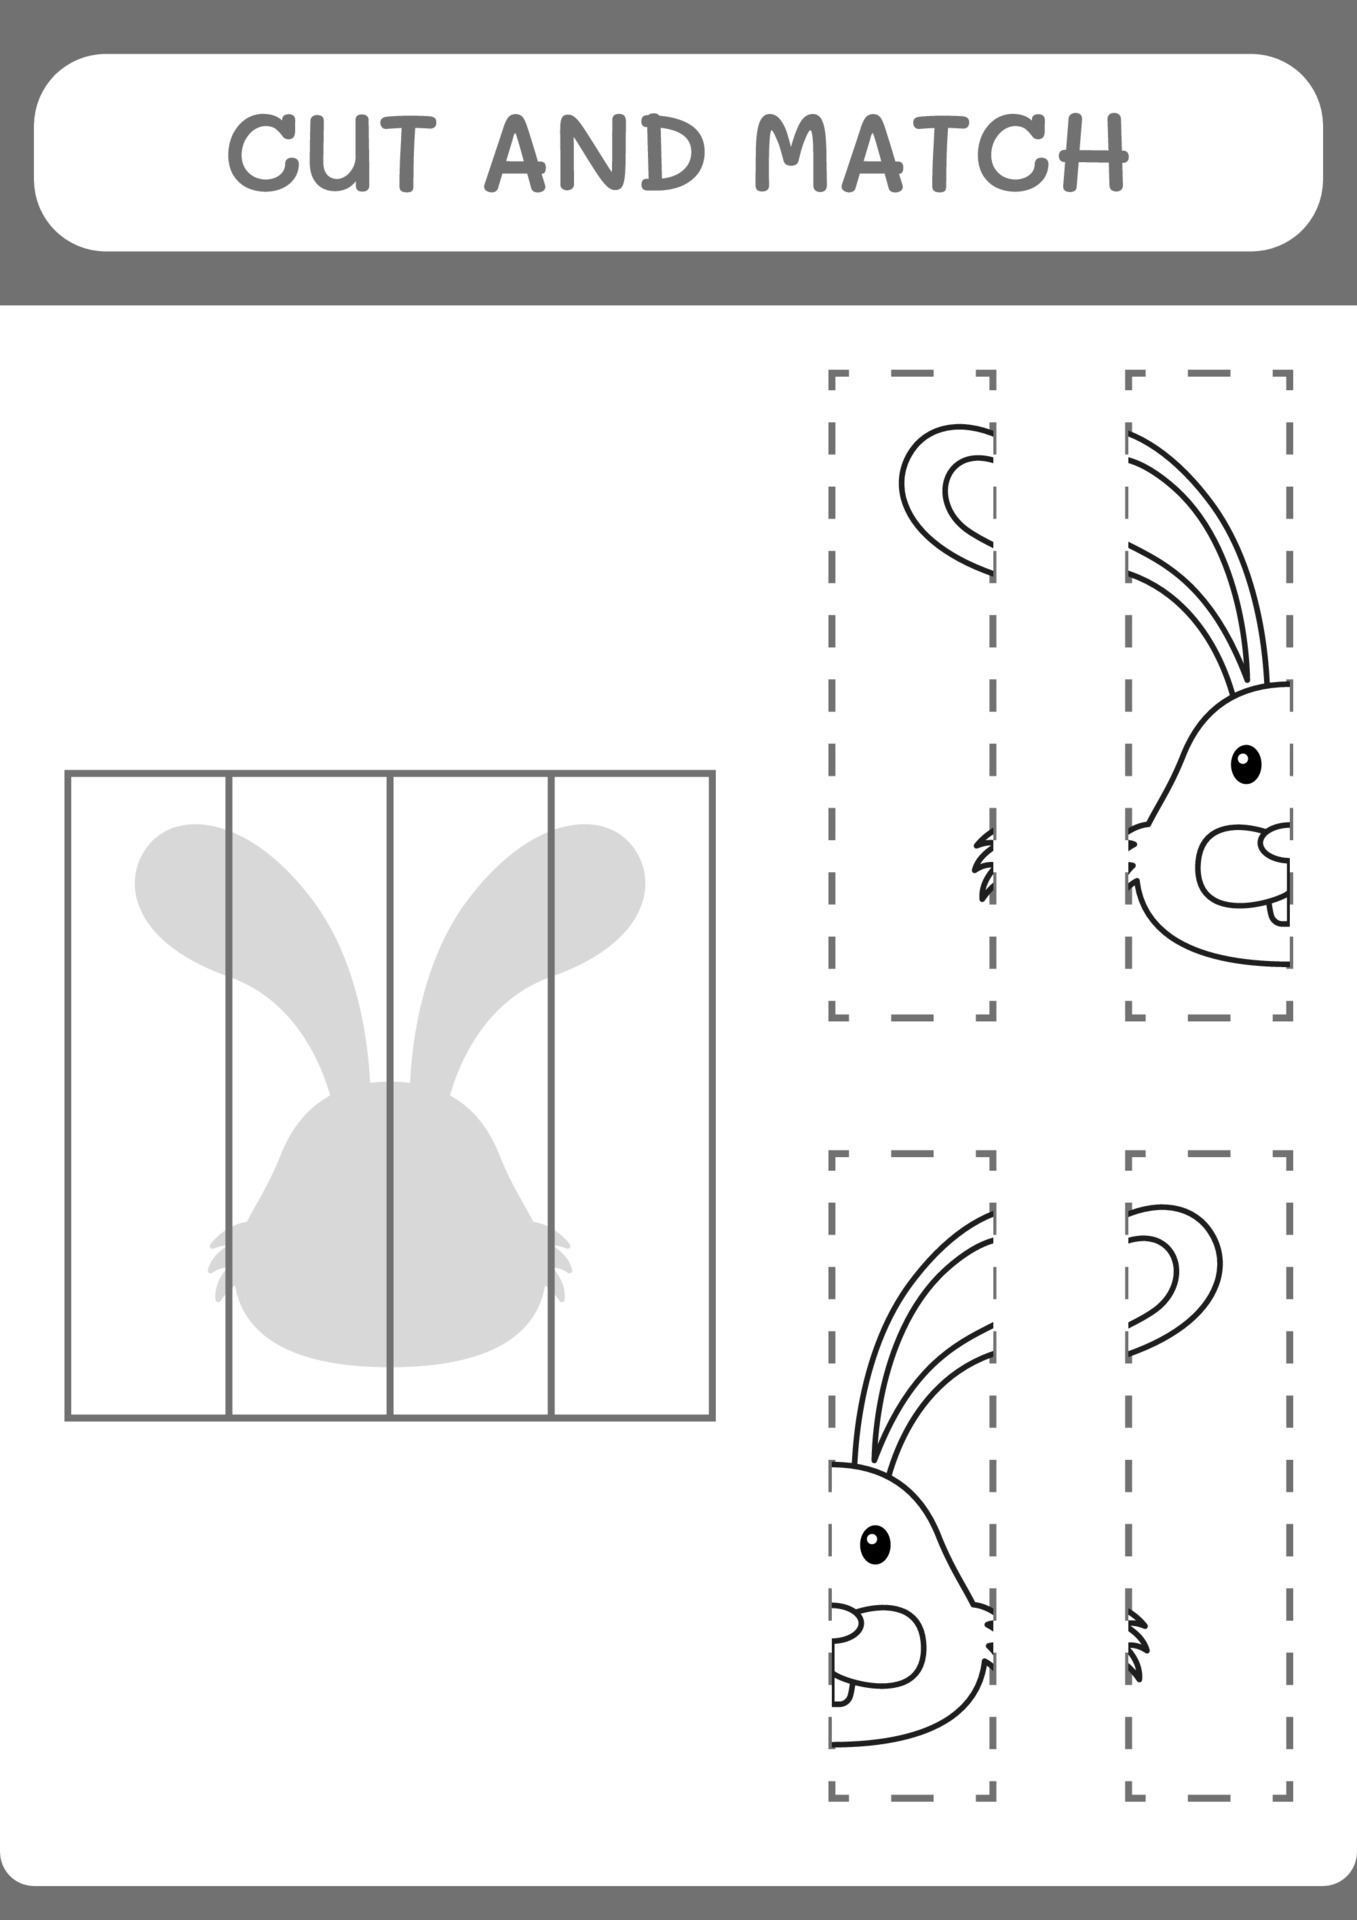 Cut and match parts of Rabbit, game for children. Vector illustration ...